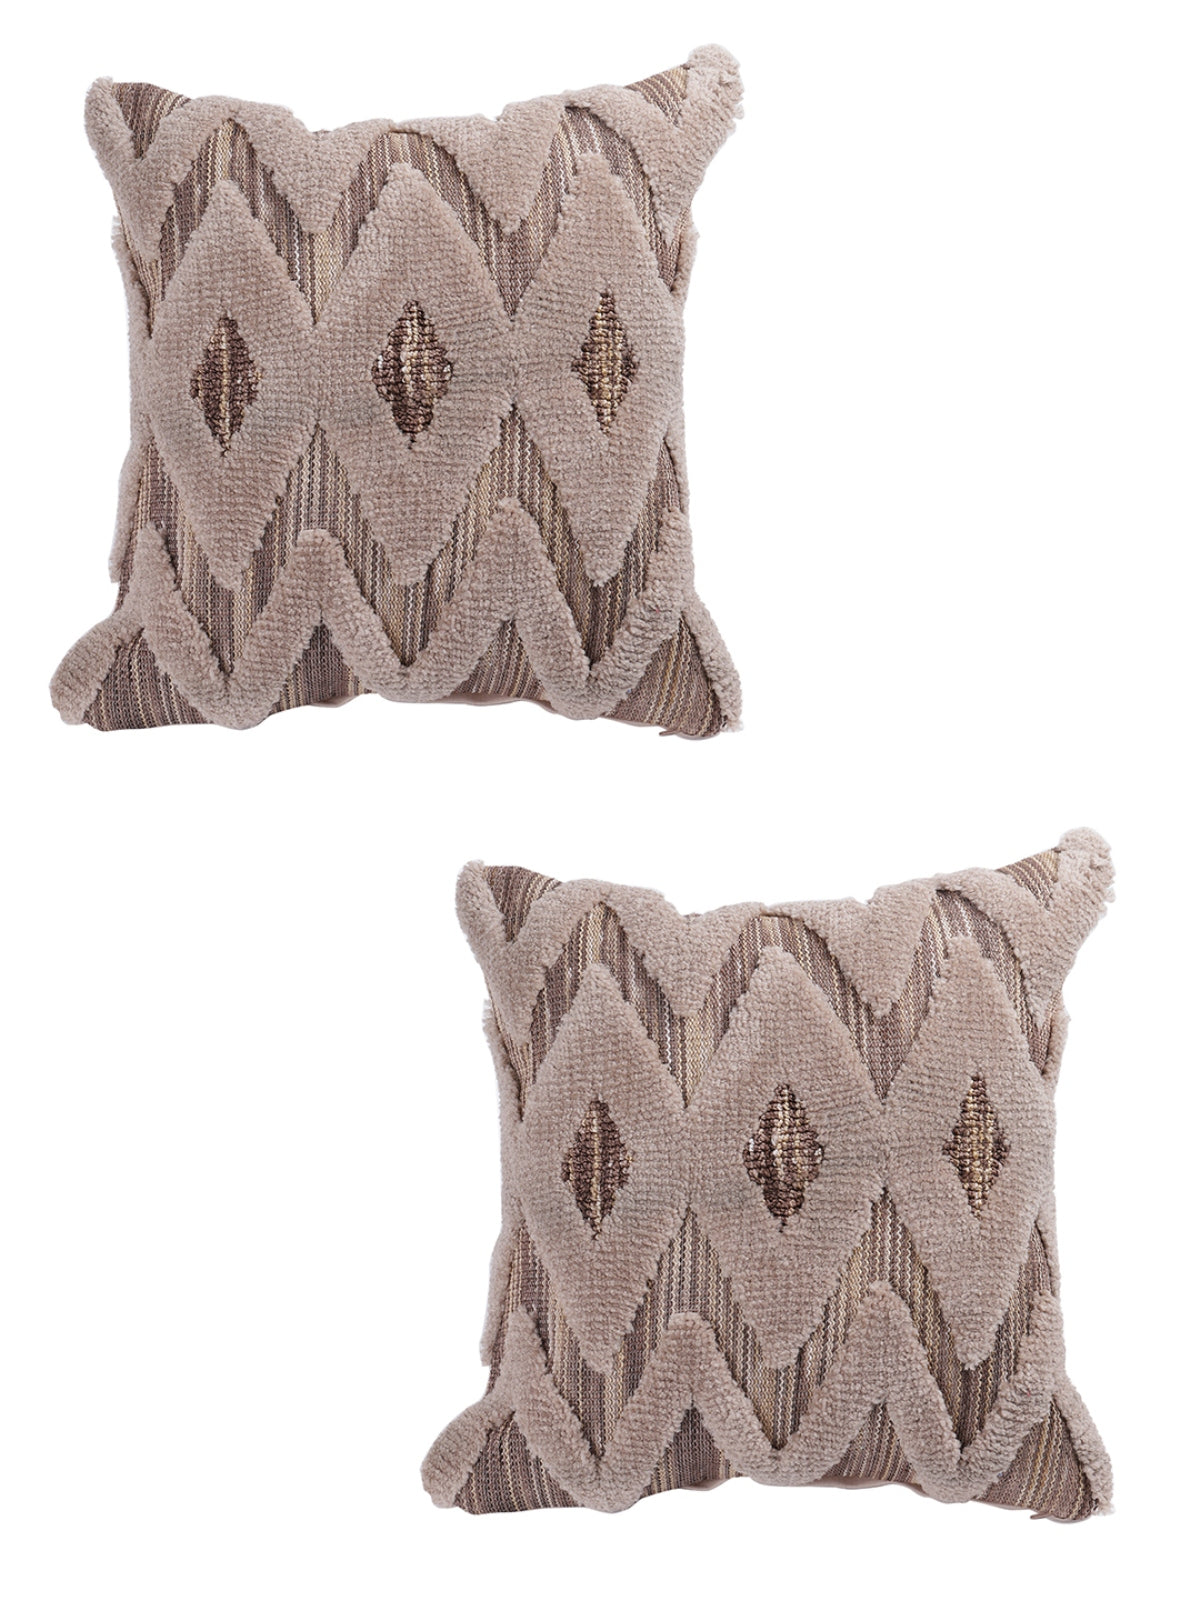 Brown & Beige Set of 2 Wool Tufted 18 Inch x 18 Inch Cushion Covers